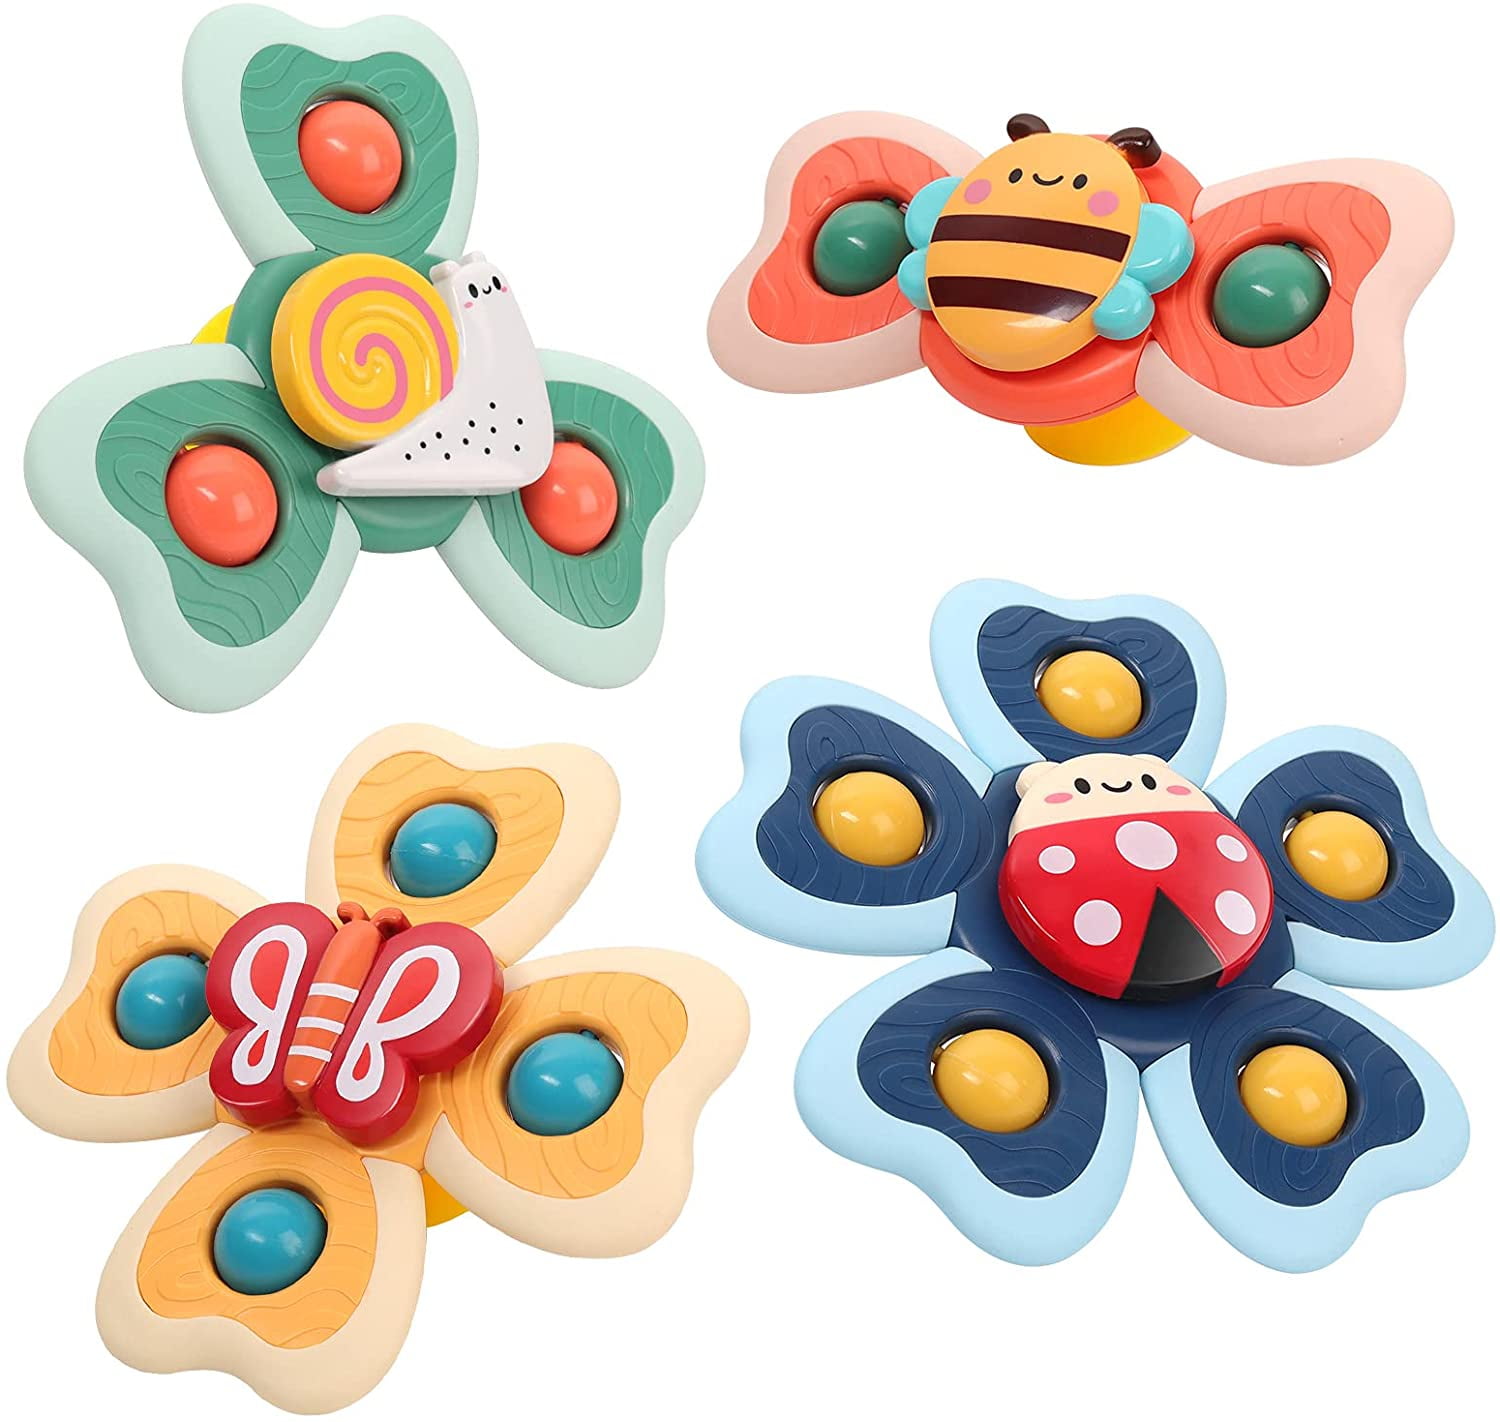 Cartoon Animal Rotating Suction Cups Toys 3Pcs eners Suction Cup Spinning Top Toys Stress Relief Frisbee Spinning Top Sensory Toys for Toddlers Kids Infants Age 1-3 